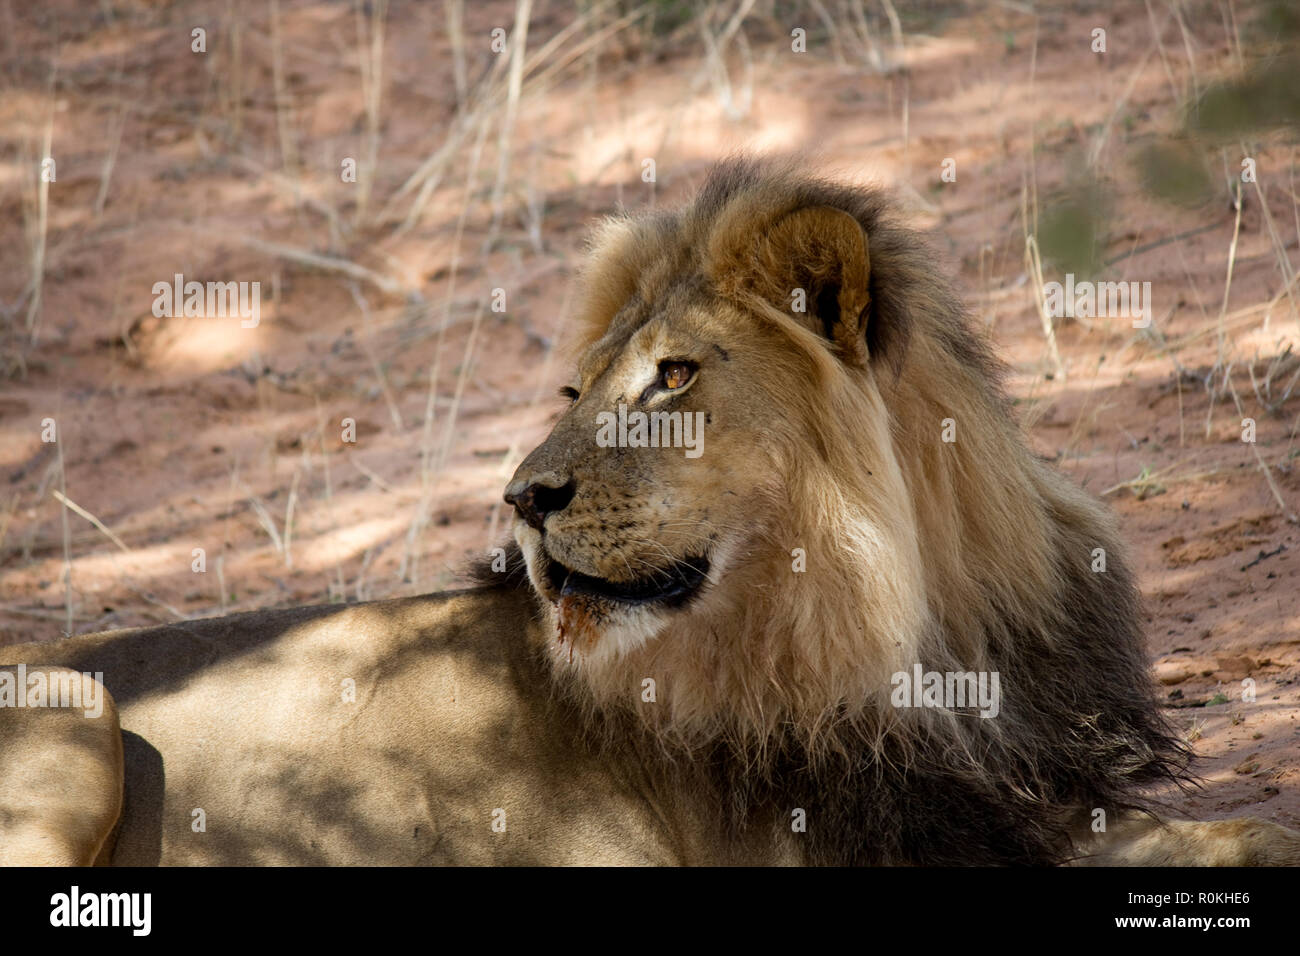 Lion in the Kgalagadi National Park Stock Photo